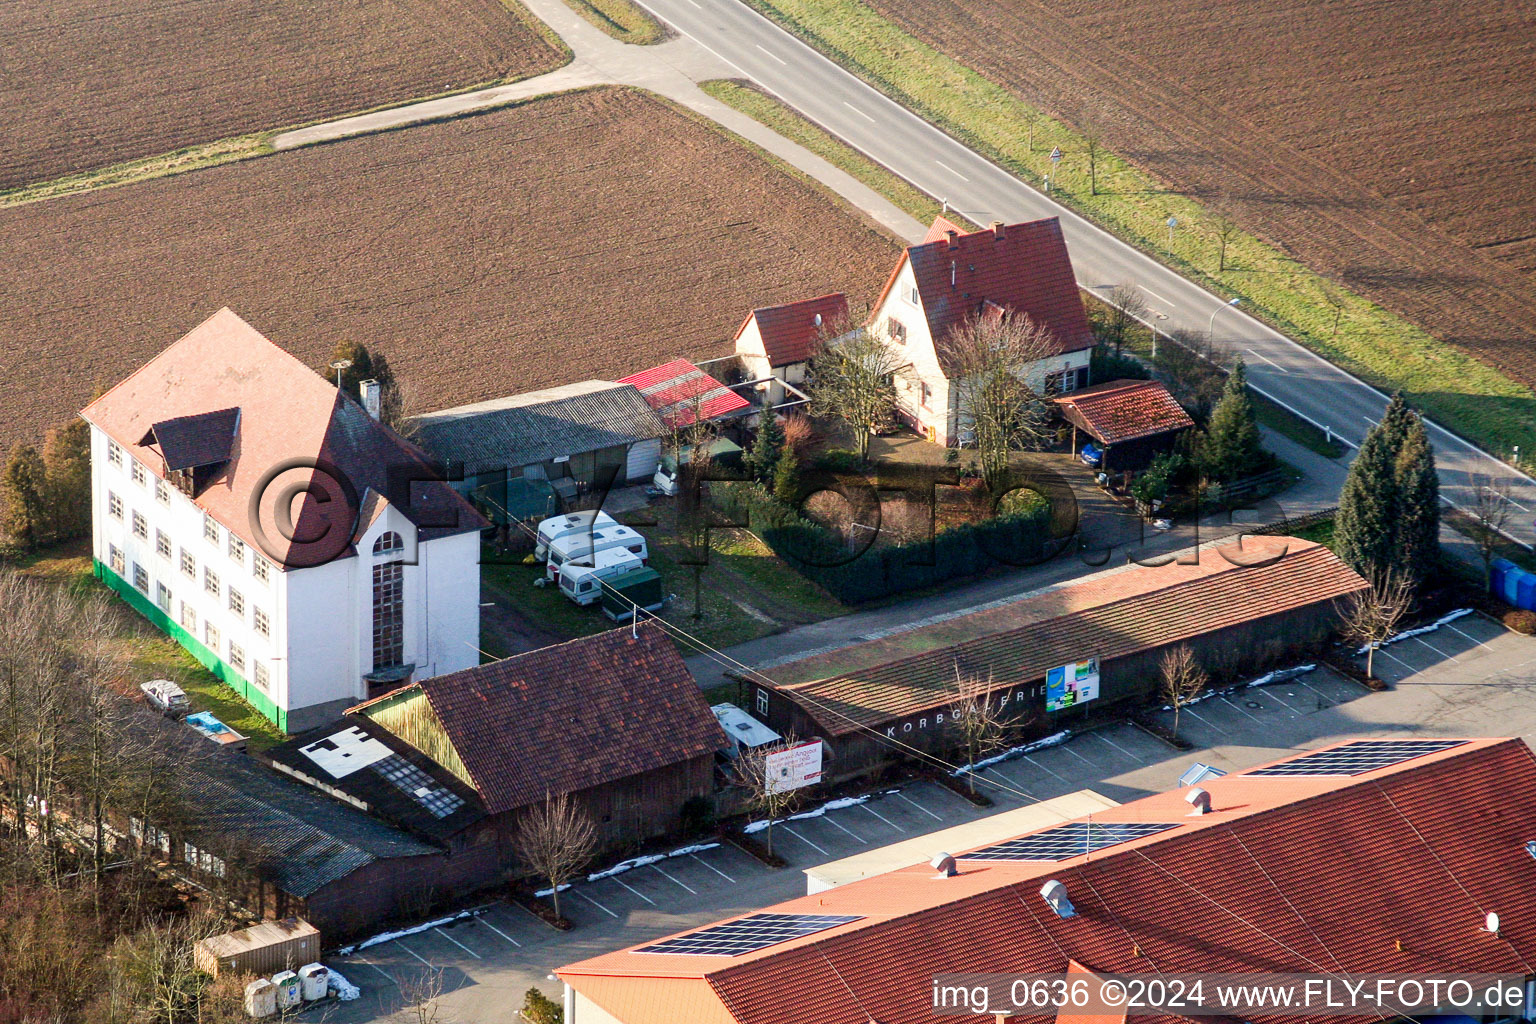 Aerial view of Commercial area at the train station in the district Schaidt in Wörth am Rhein in the state Rhineland-Palatinate, Germany